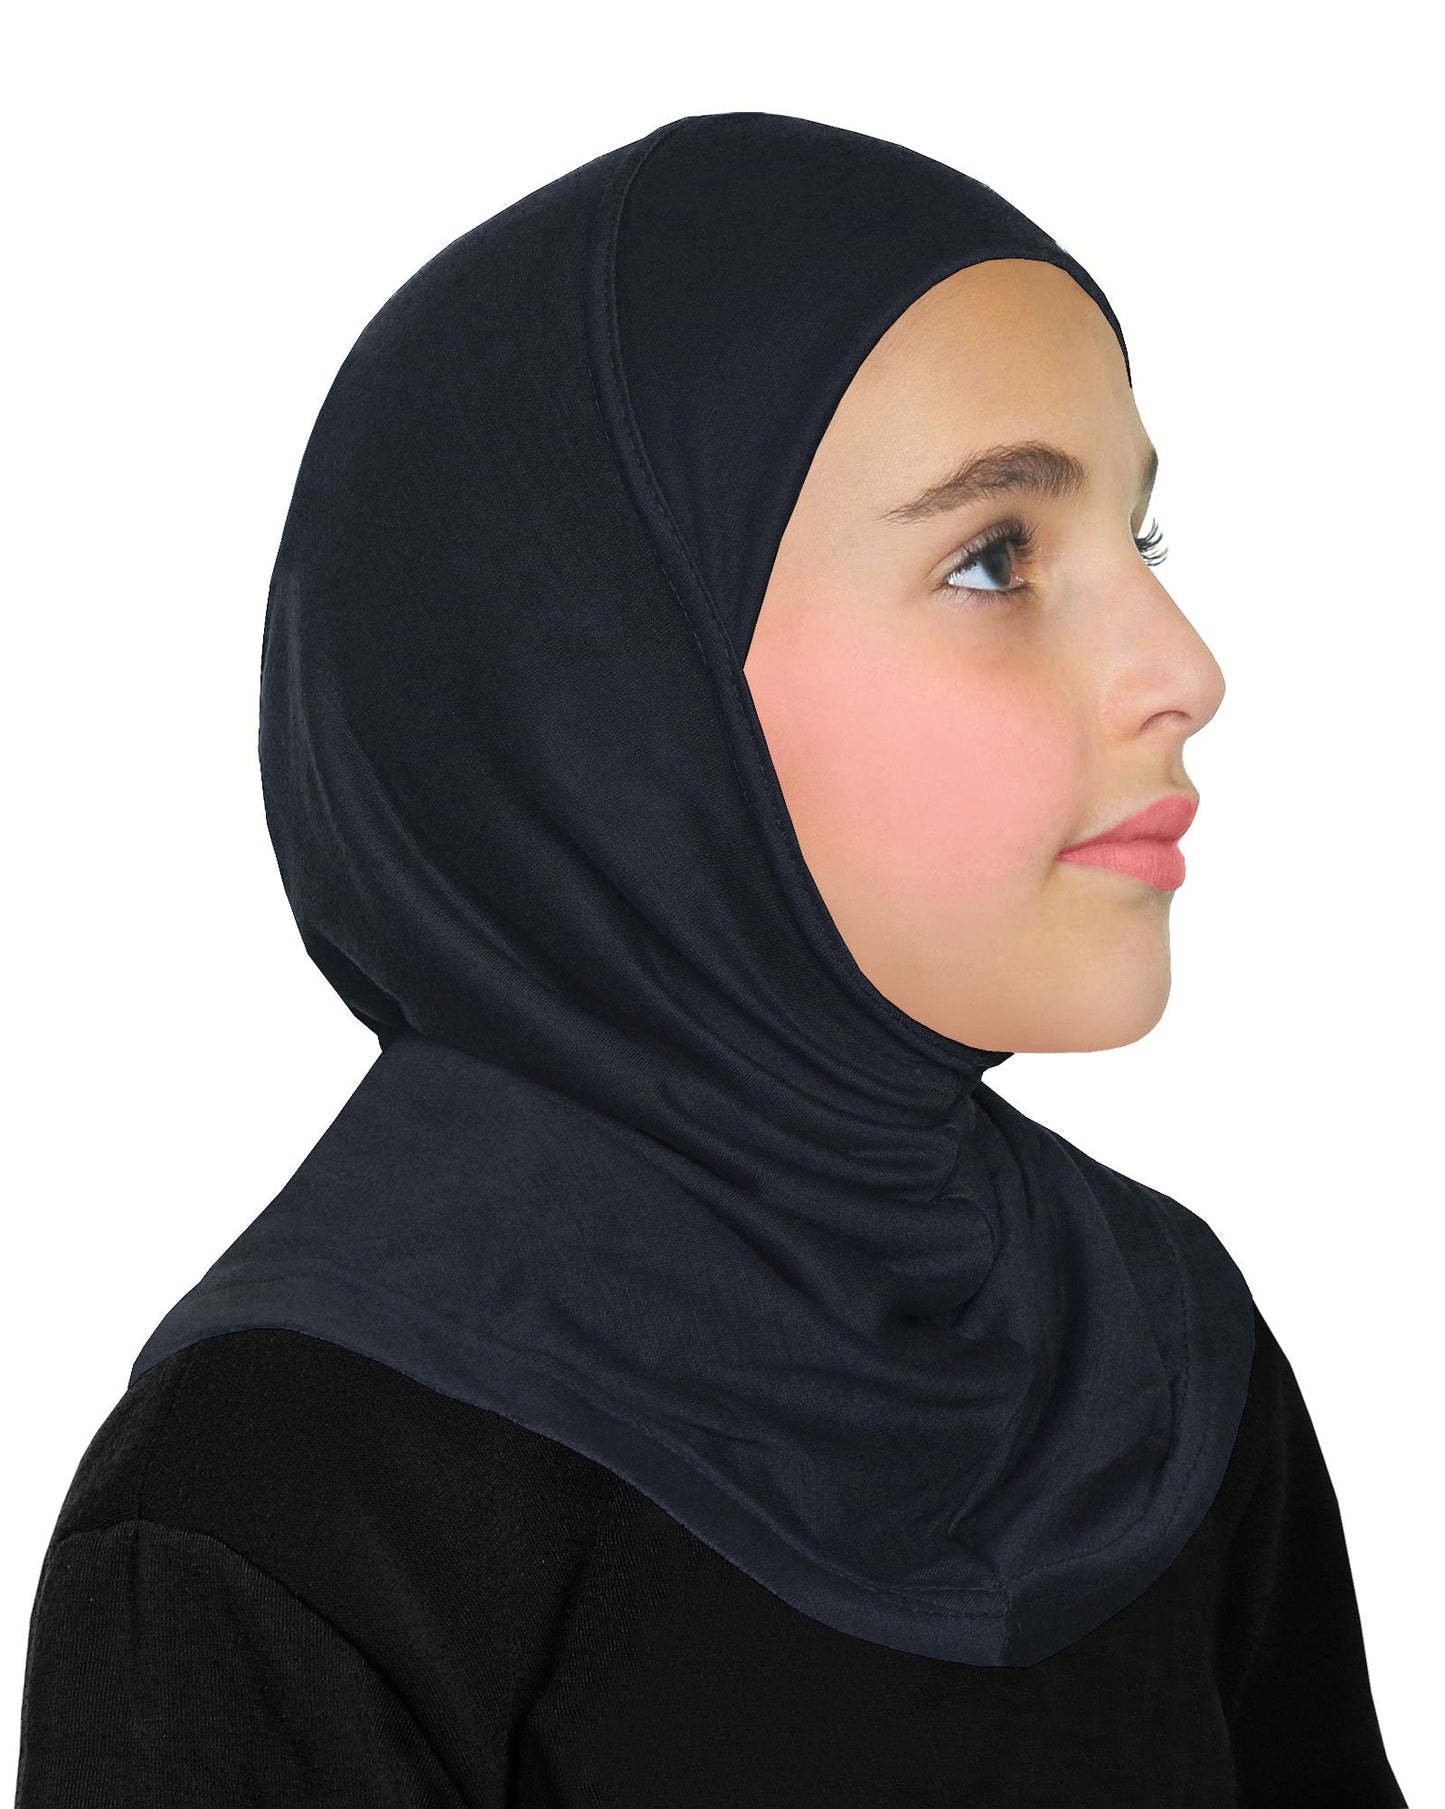 SMALL Girl's Amira Hijab one piece Cotton Pull On Headscarf UP TO 6 YEARS OLD